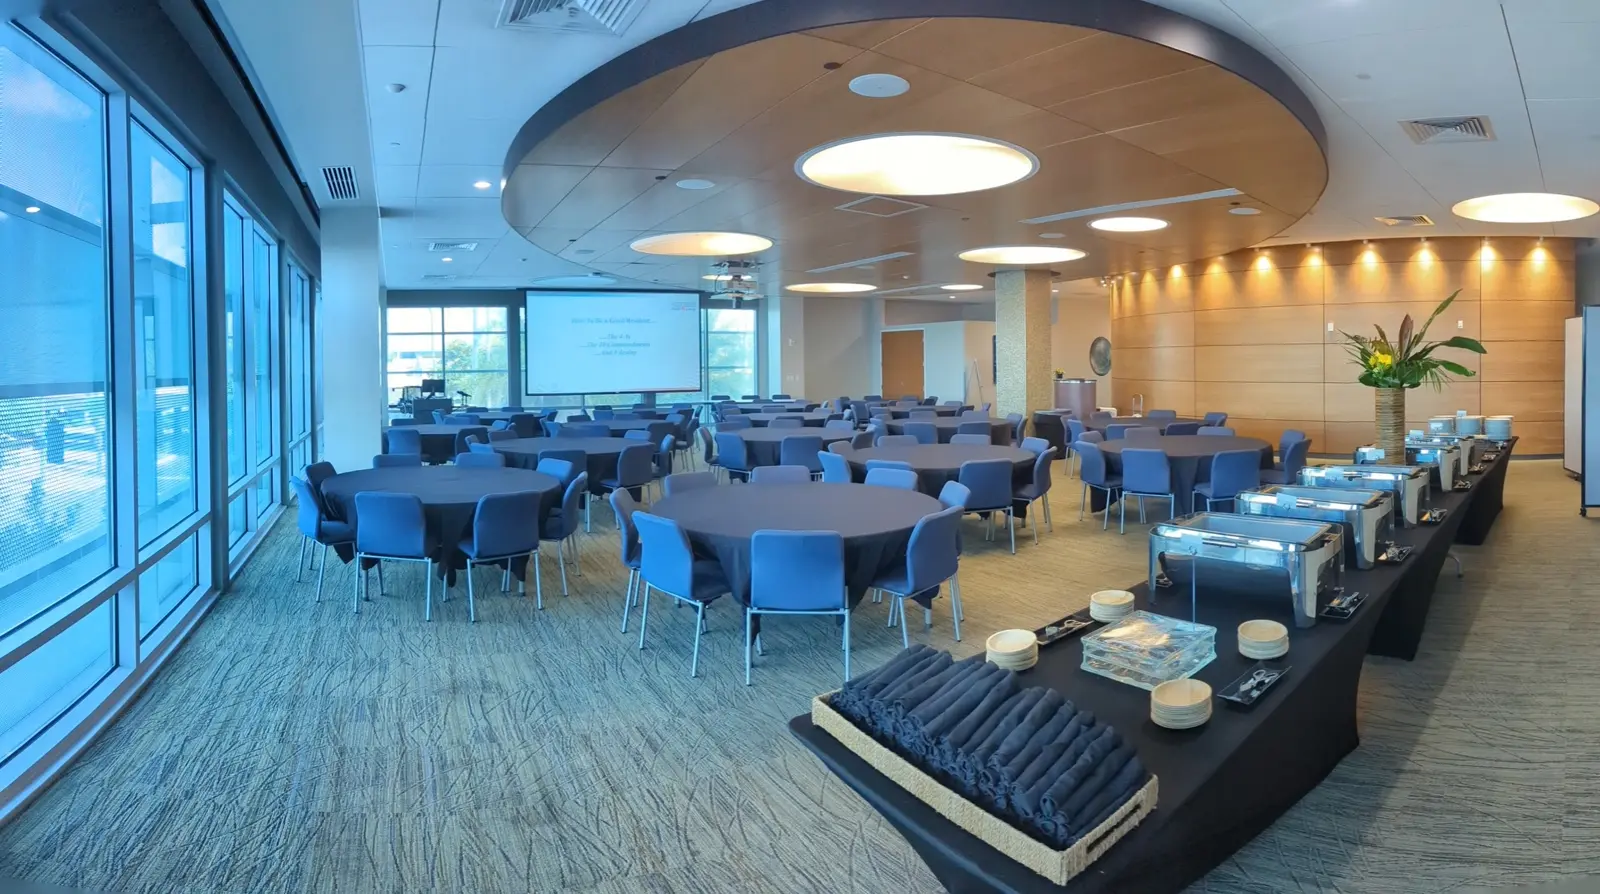 CAMLS A modern conference room with round tables covered in blue tablecloths and matching blue chairs. A buffet table with chafing dishes and neatly arranged utensils is set up on the right. Large windows let in natural light, and a projector screen is at the far end.